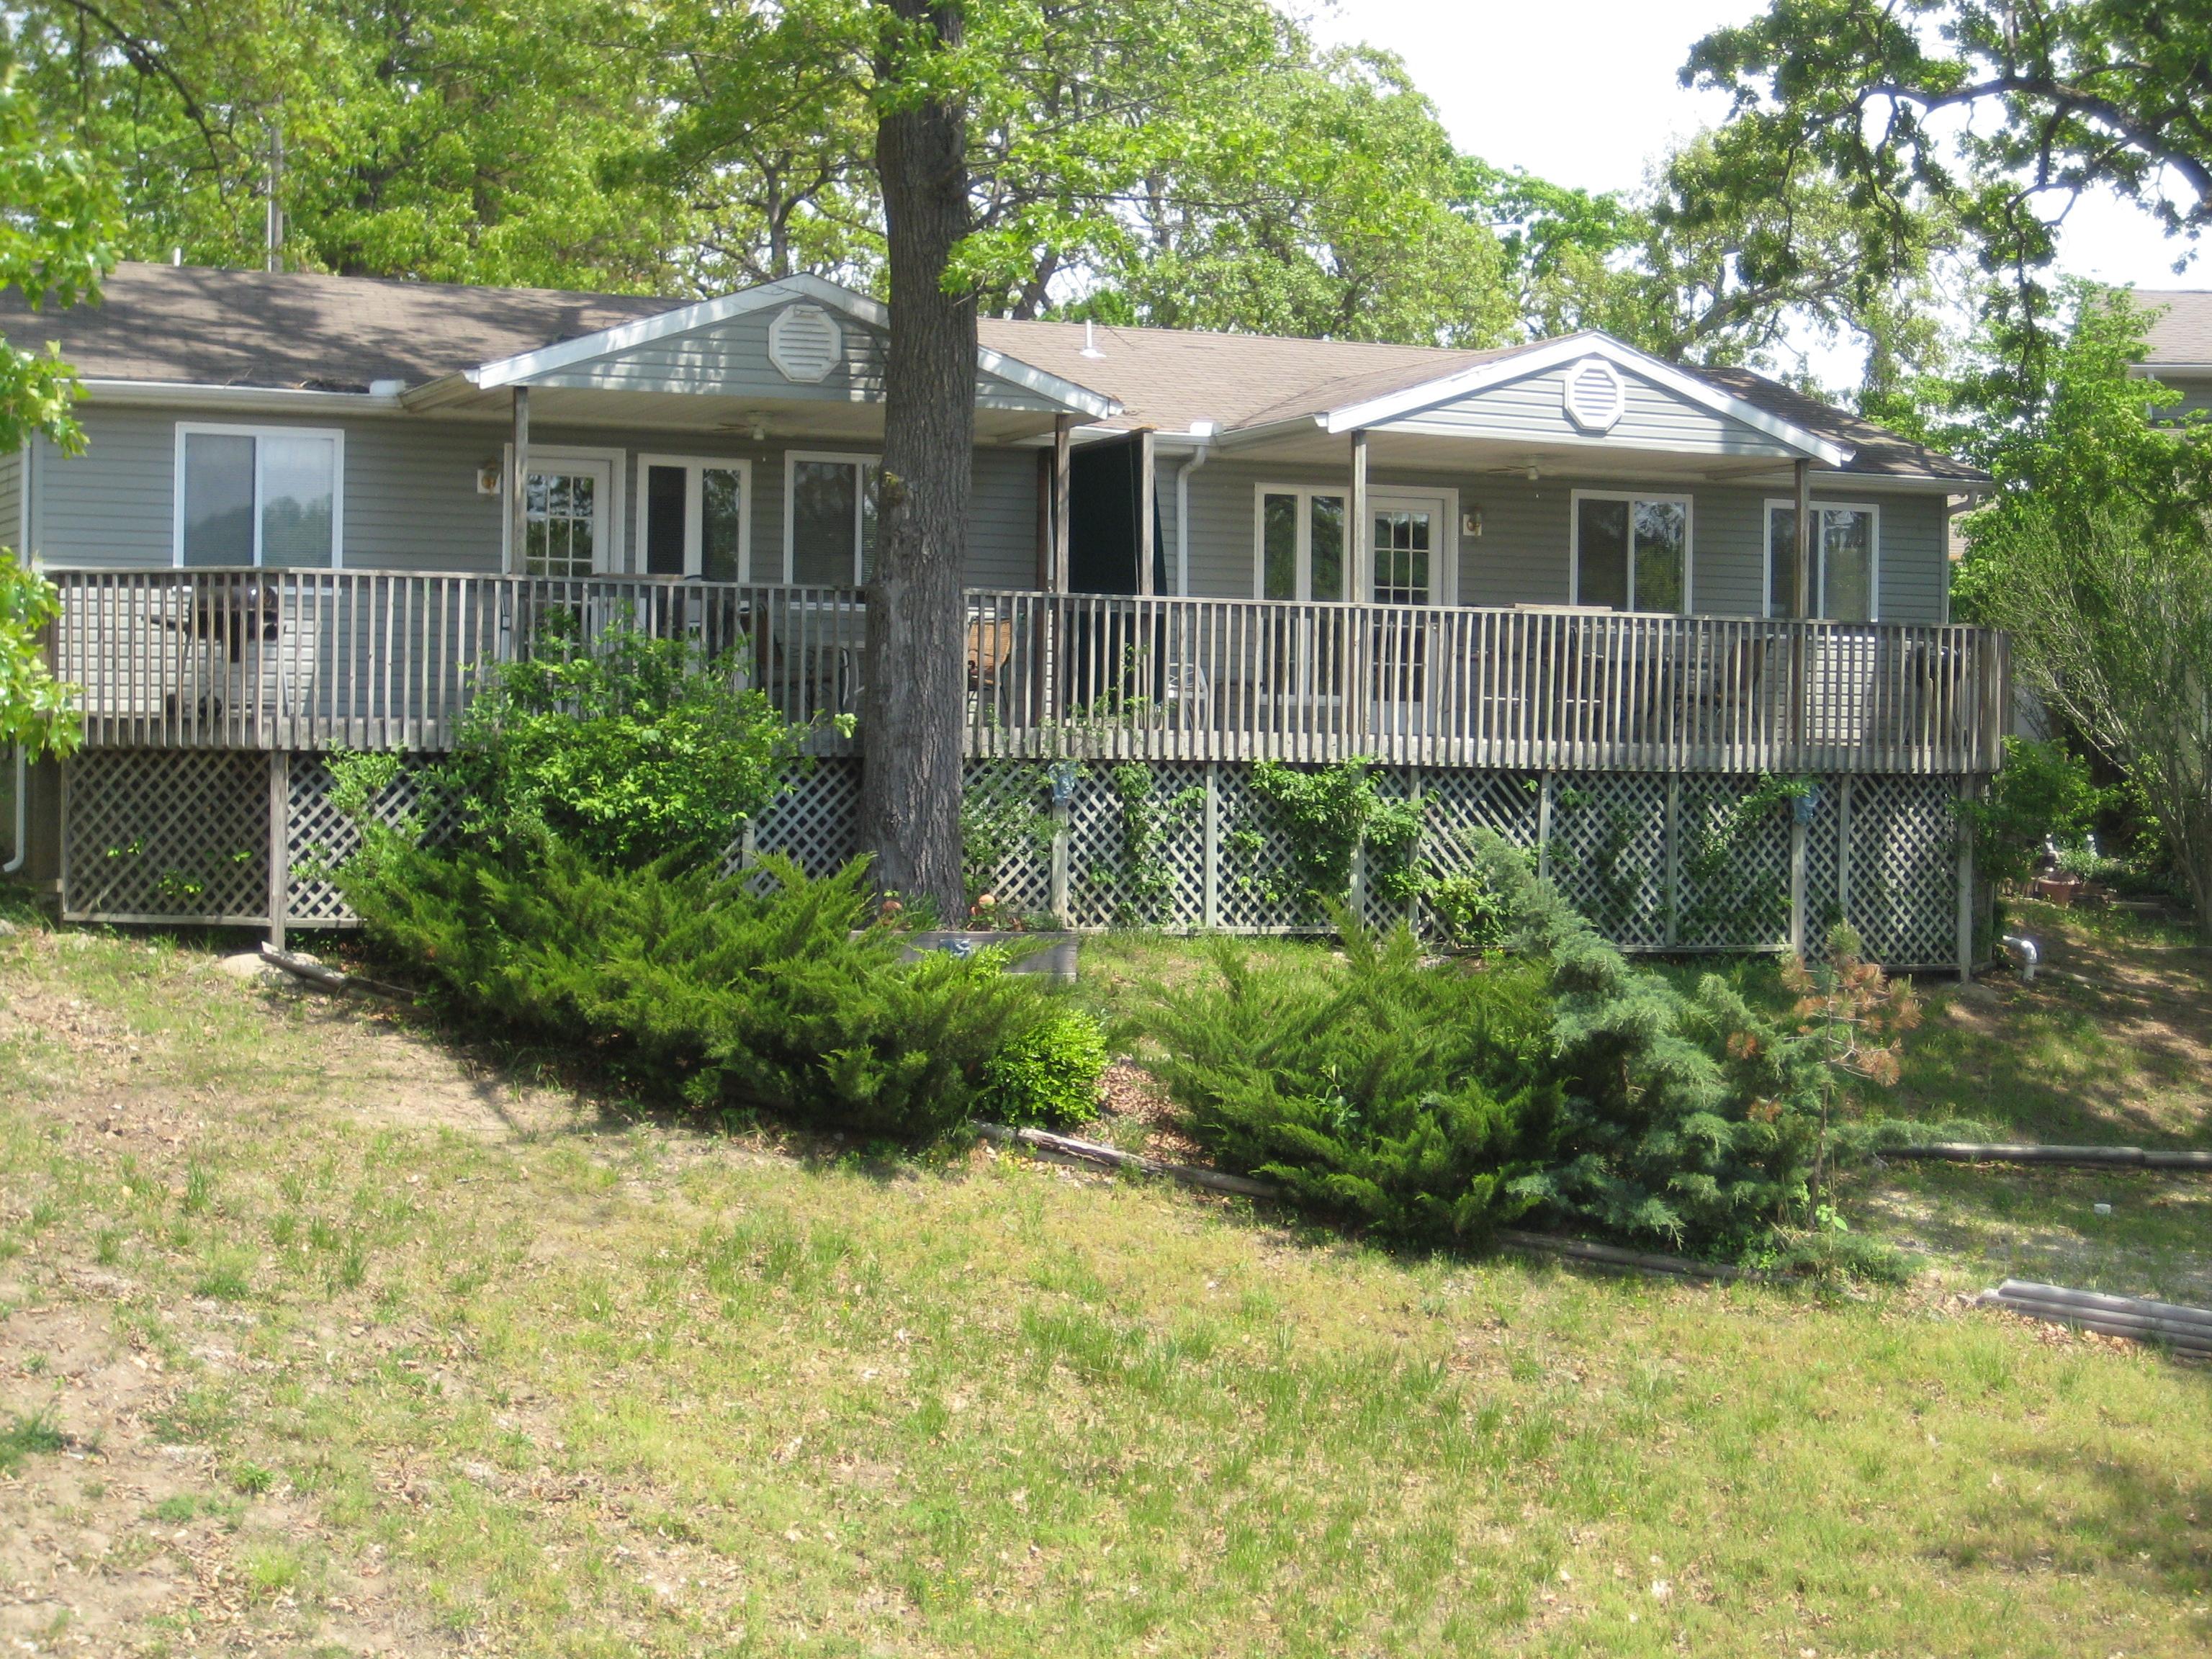 Two 1 BR ! Bath units completely contained--full kitchens, separated by utility room, Great deck over looking the Lake. A short walk to dock for swimming , fishing or hanging out.